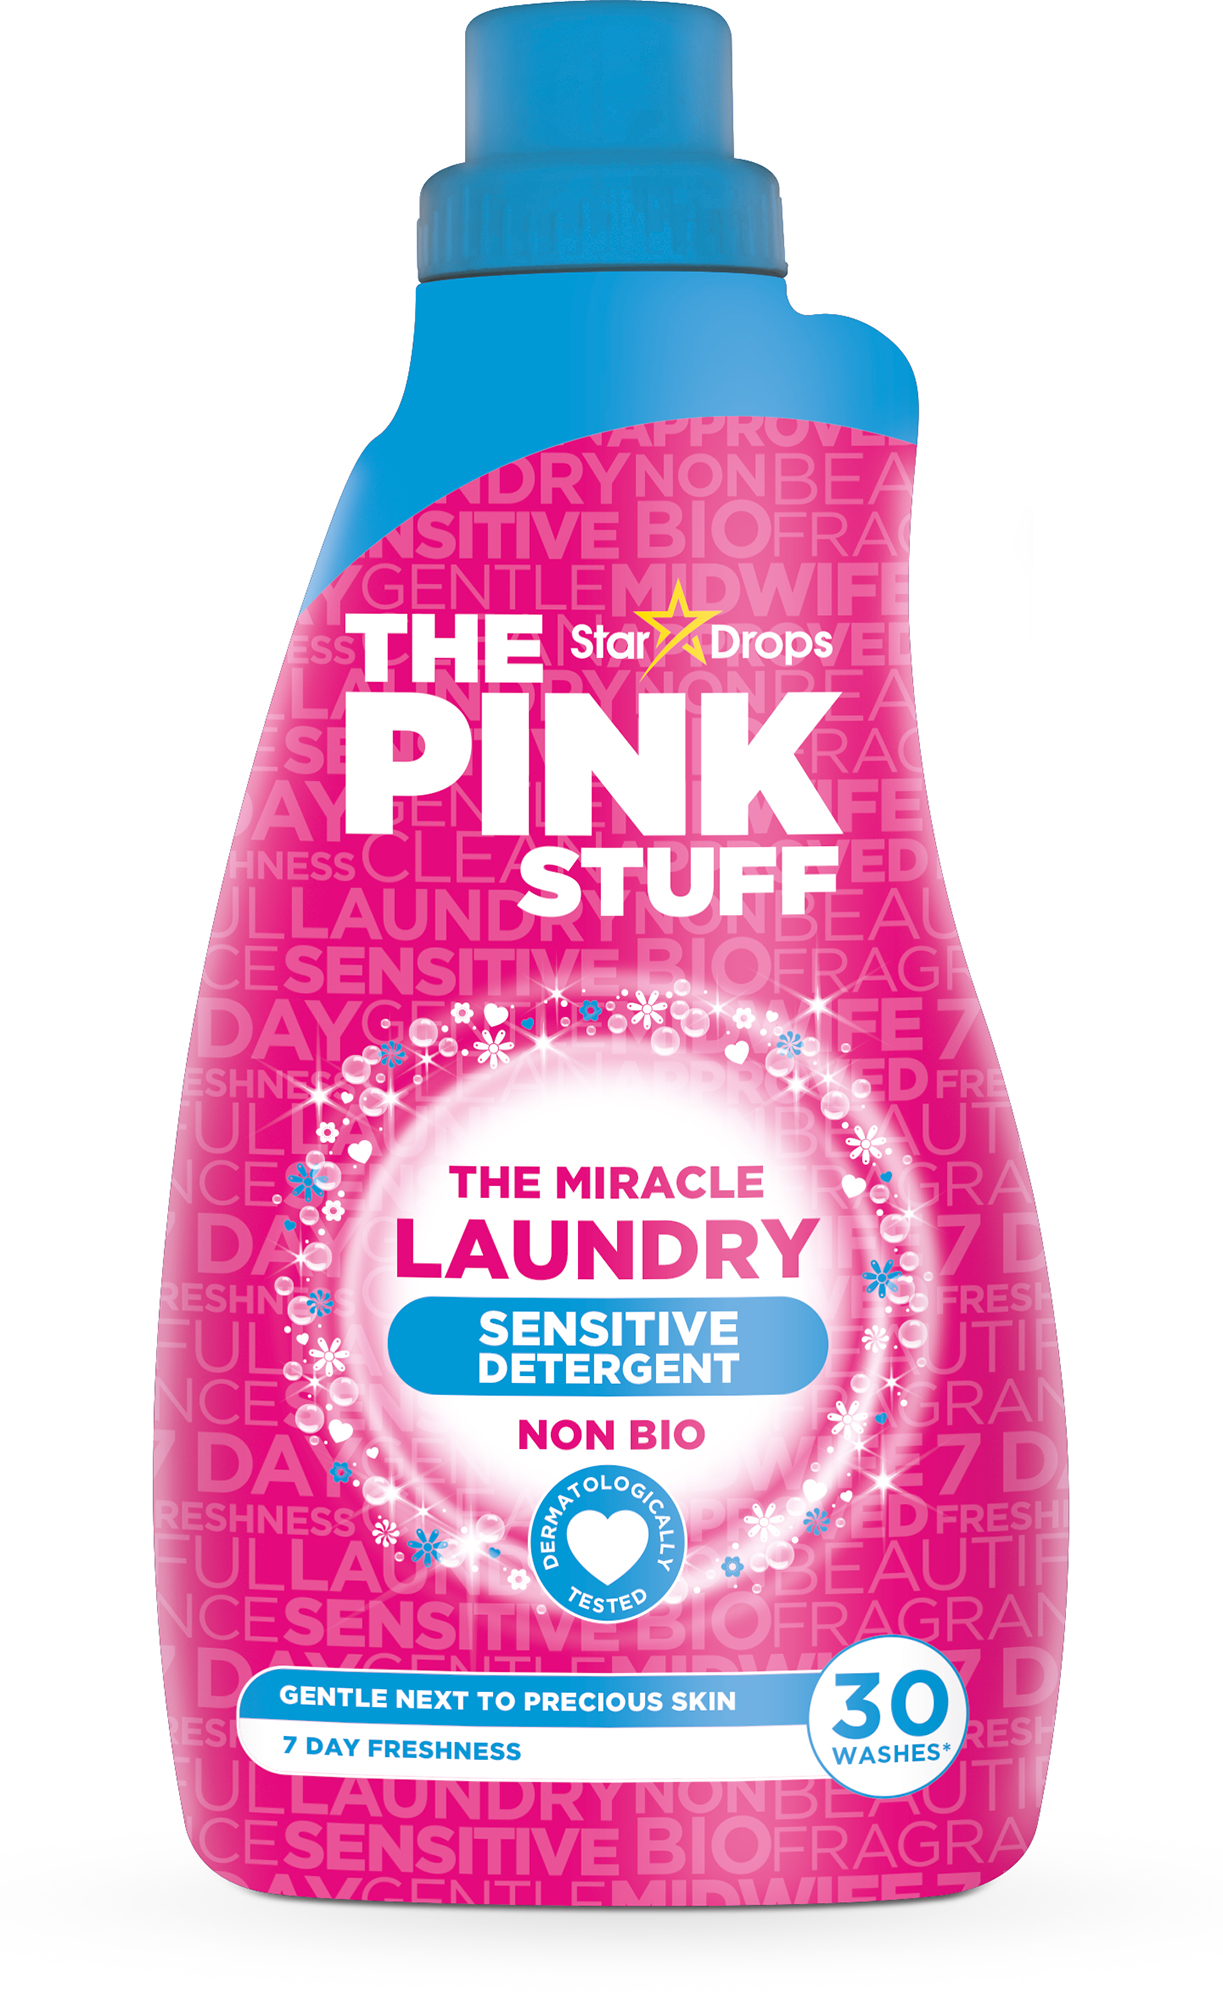 https://lyko.com/globalassets/product-images/the-pink-stuff-the-miracle-laundry-sensitive-non-bio-liquid--3278-112-0960_1.jpg?ref=9B0BC6C473